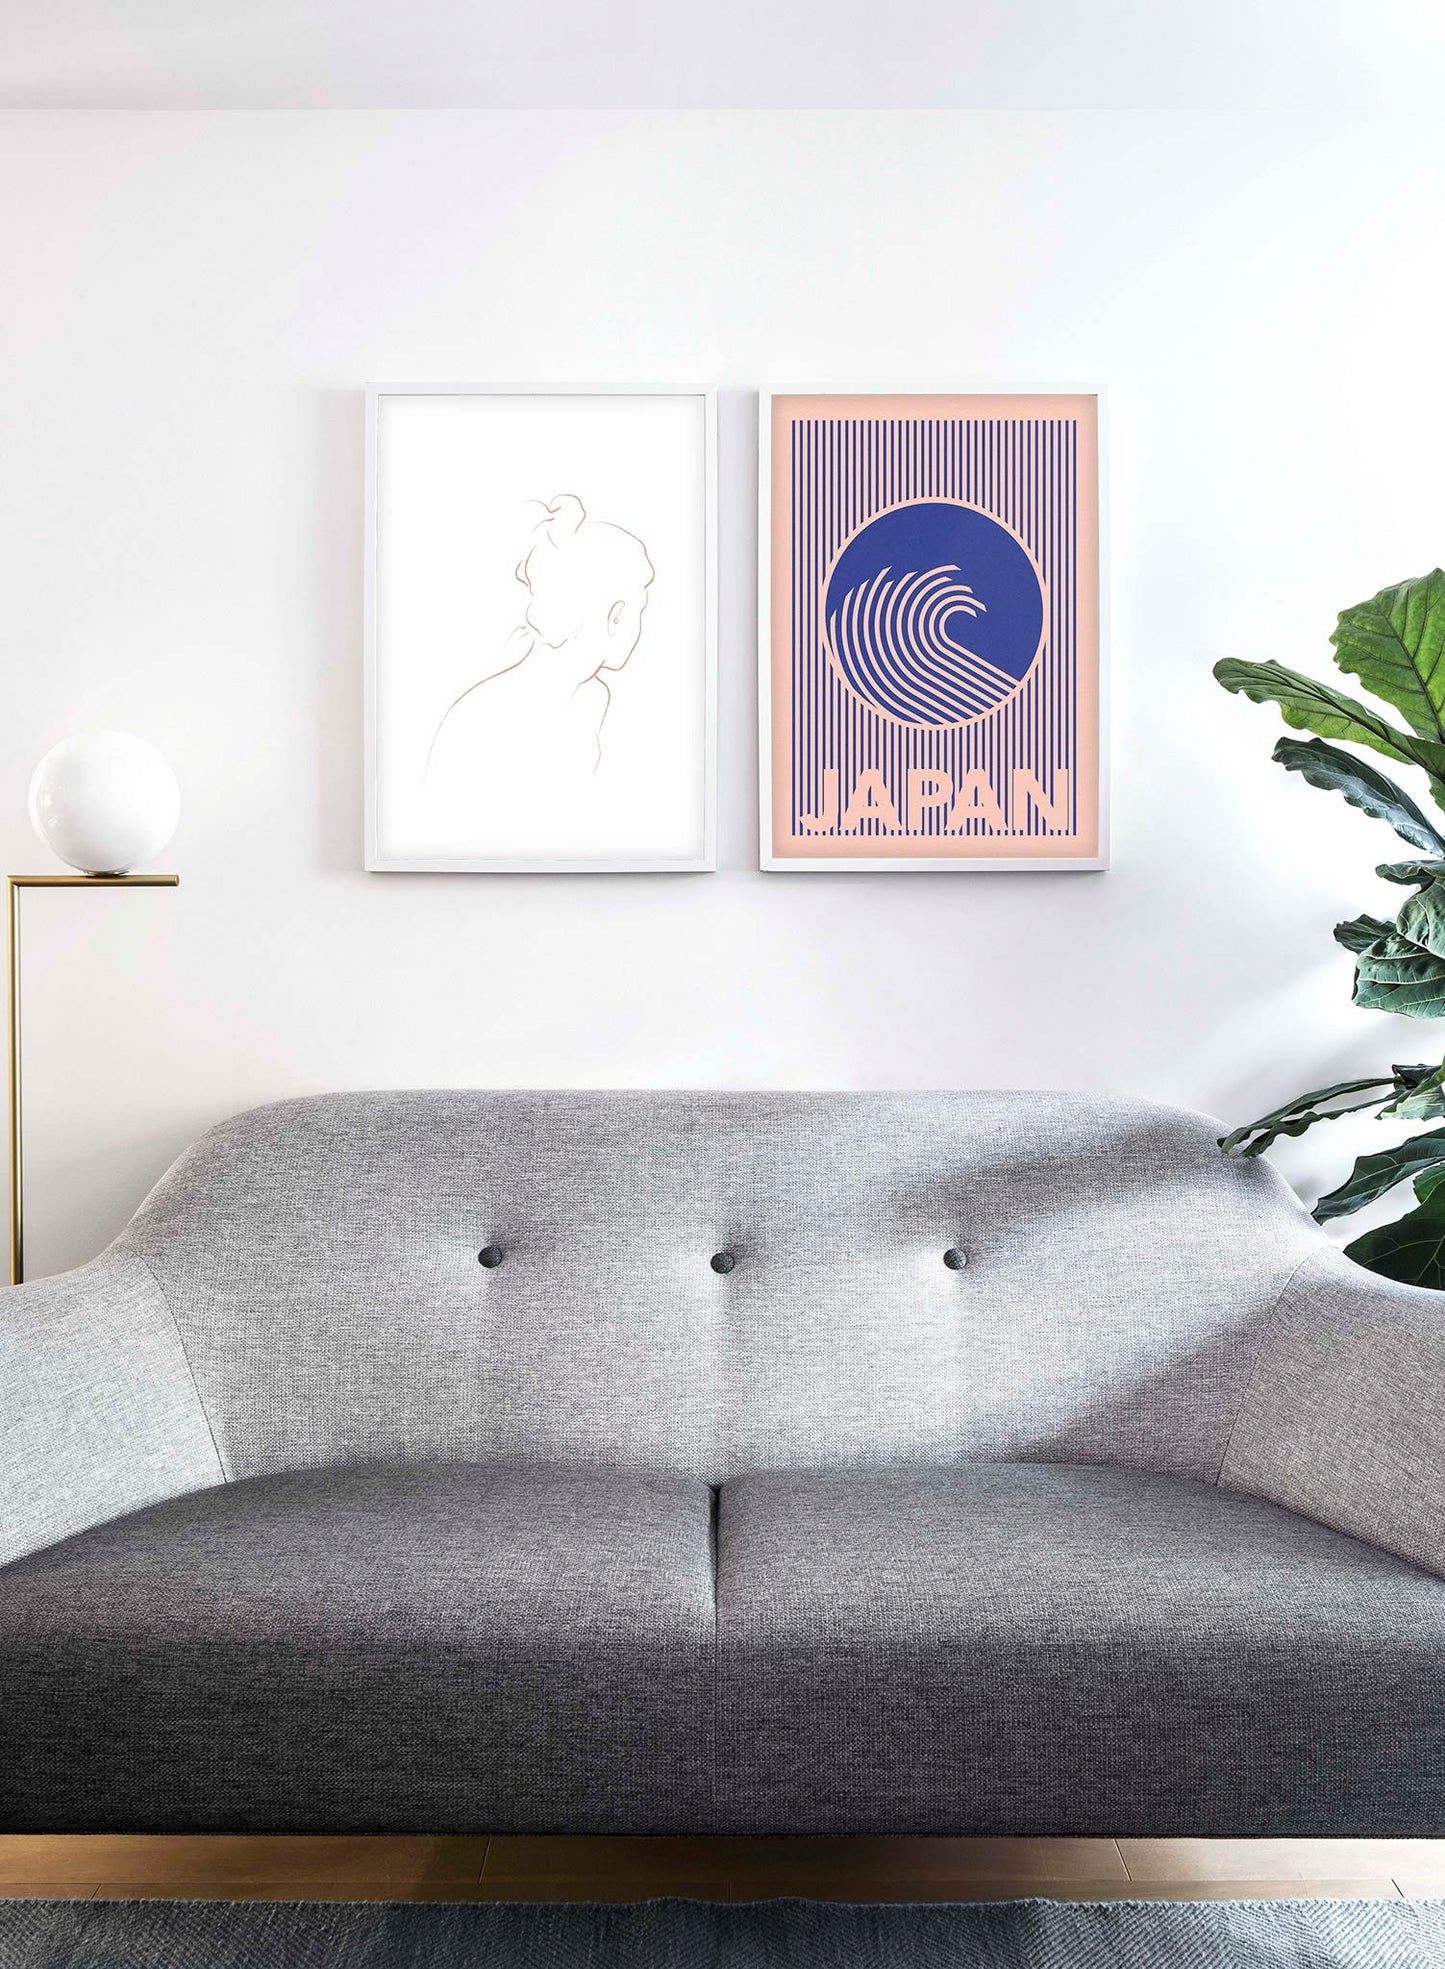 Minimalist pop art paper illustration by German artist Rosi Feist with Japanese style wave - Lifestyle Duo - Living Room